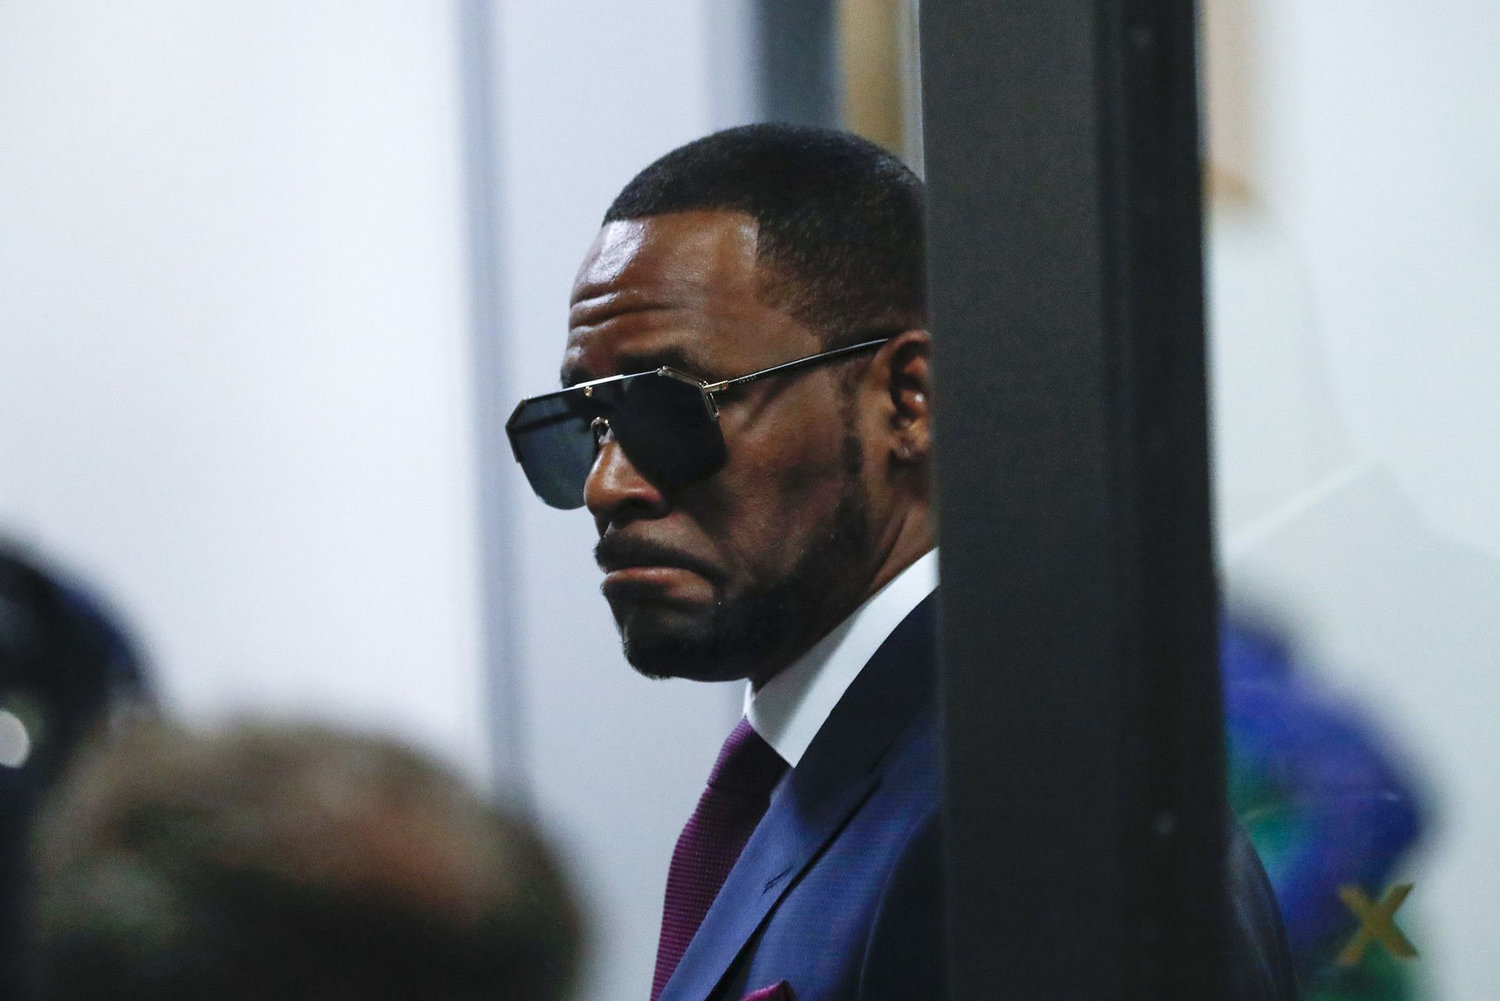 Singer R. Kelly attends a hearing at the Daley Center in Chicago on March 13, 2019. (Jose M. Osorio/Chicago Tribune/TNS)